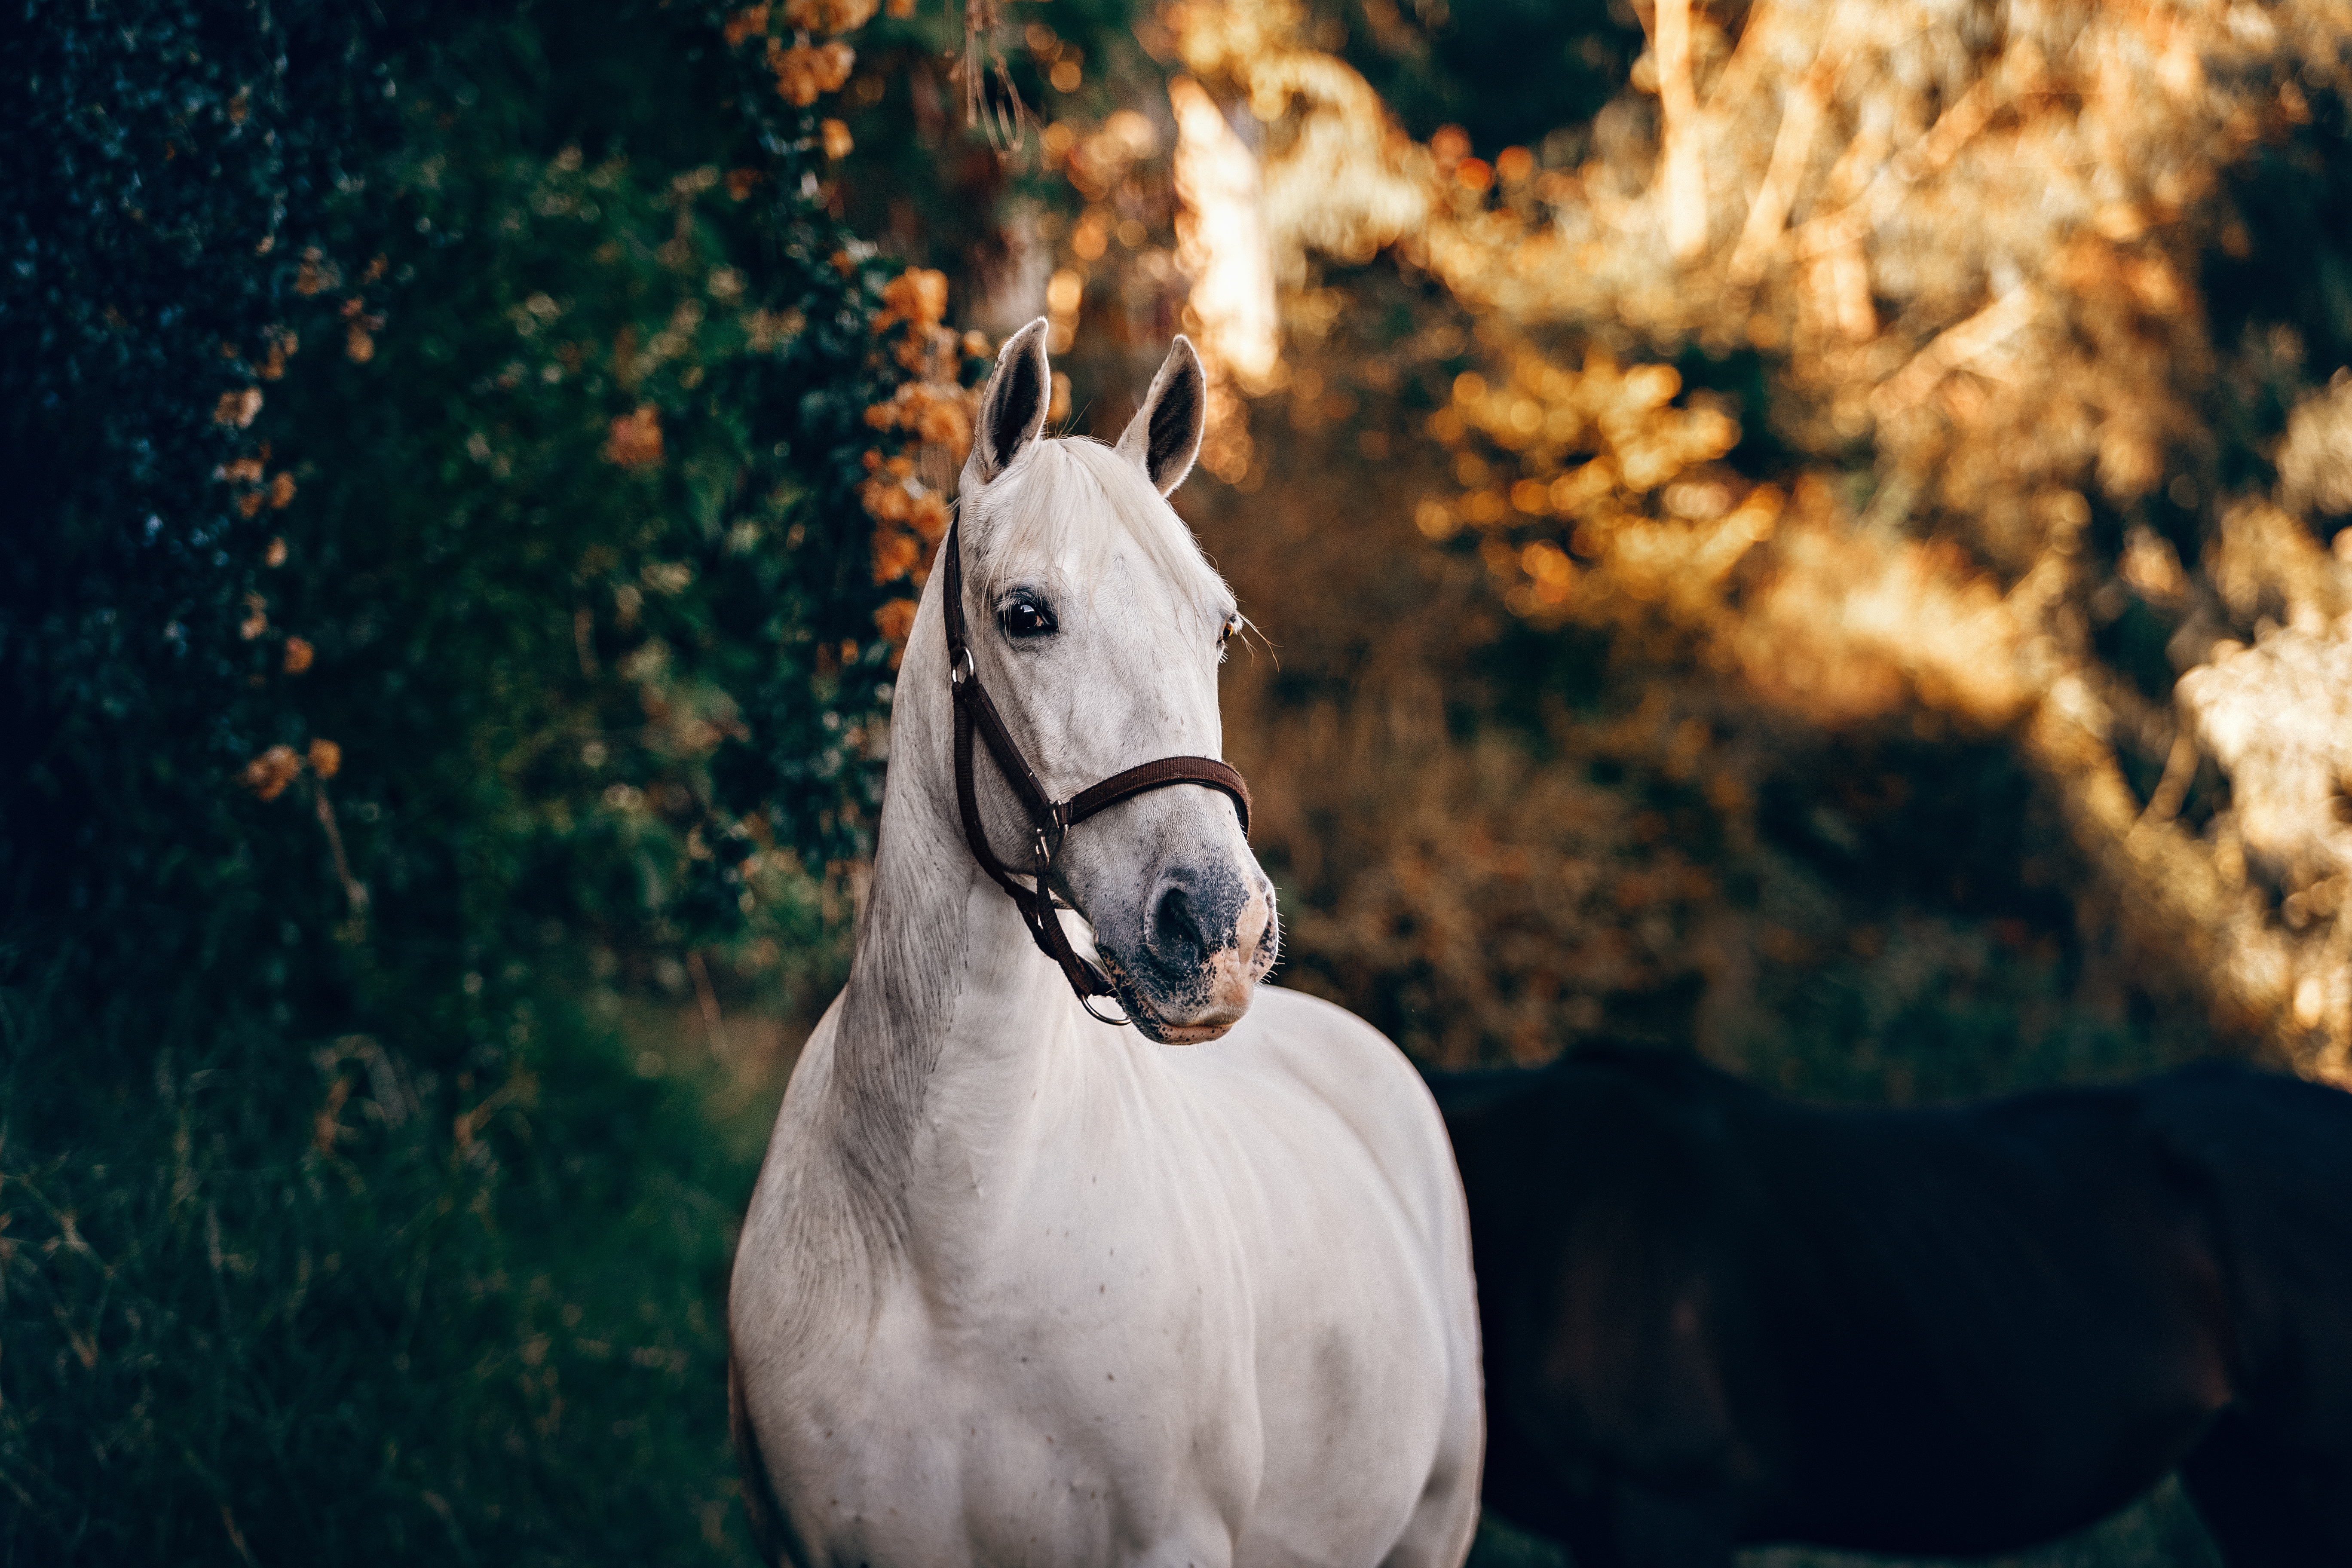 A beautiful white horse in a harness